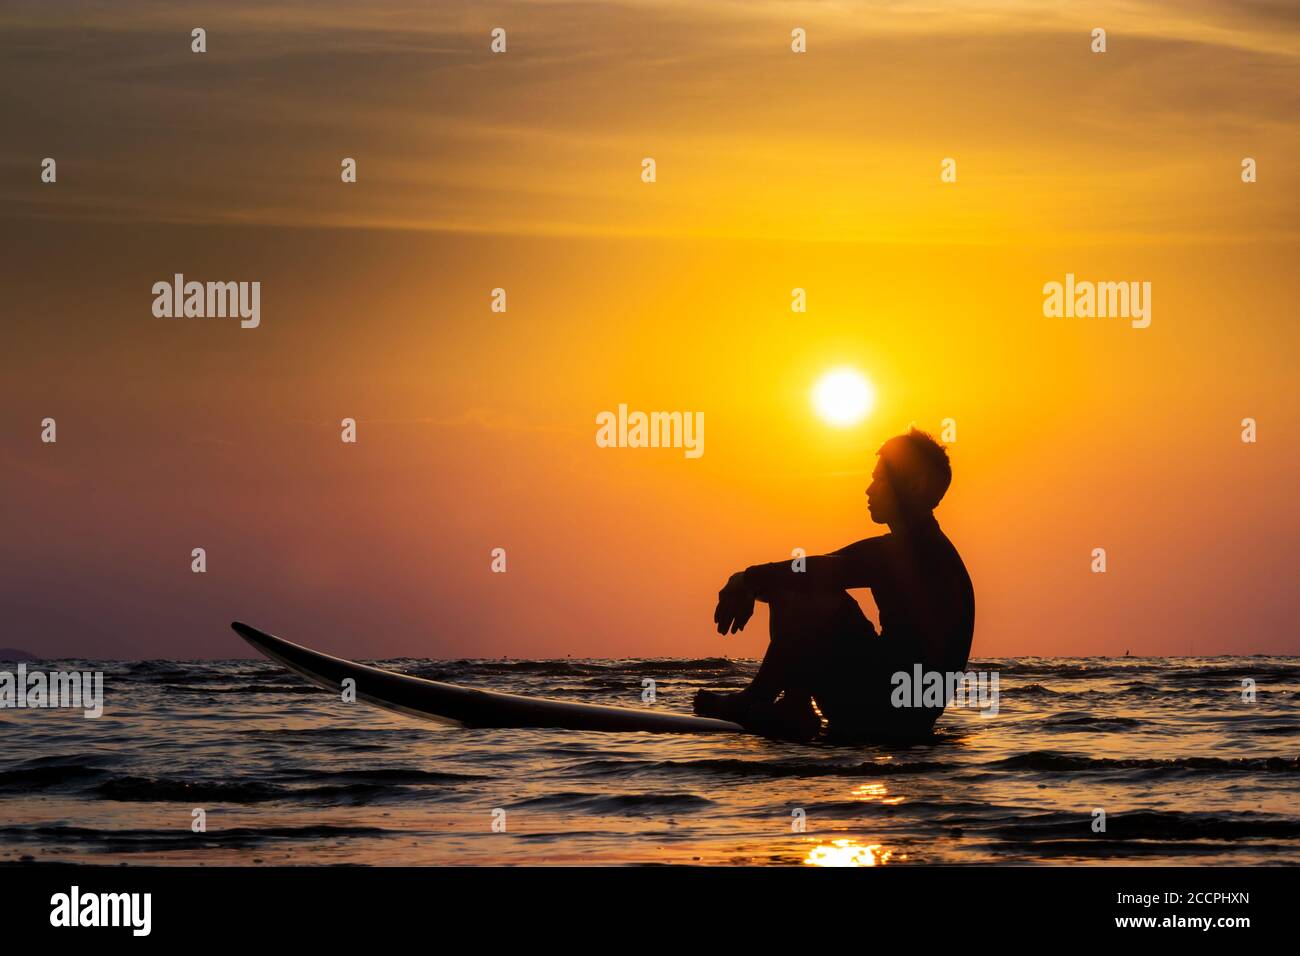 Silhouette of surf man sit on a surfboard. Surfing at sunset beach. Outdoor water sport adventure lifestyle.Summer activity. Handsome Asia male model Stock Photo